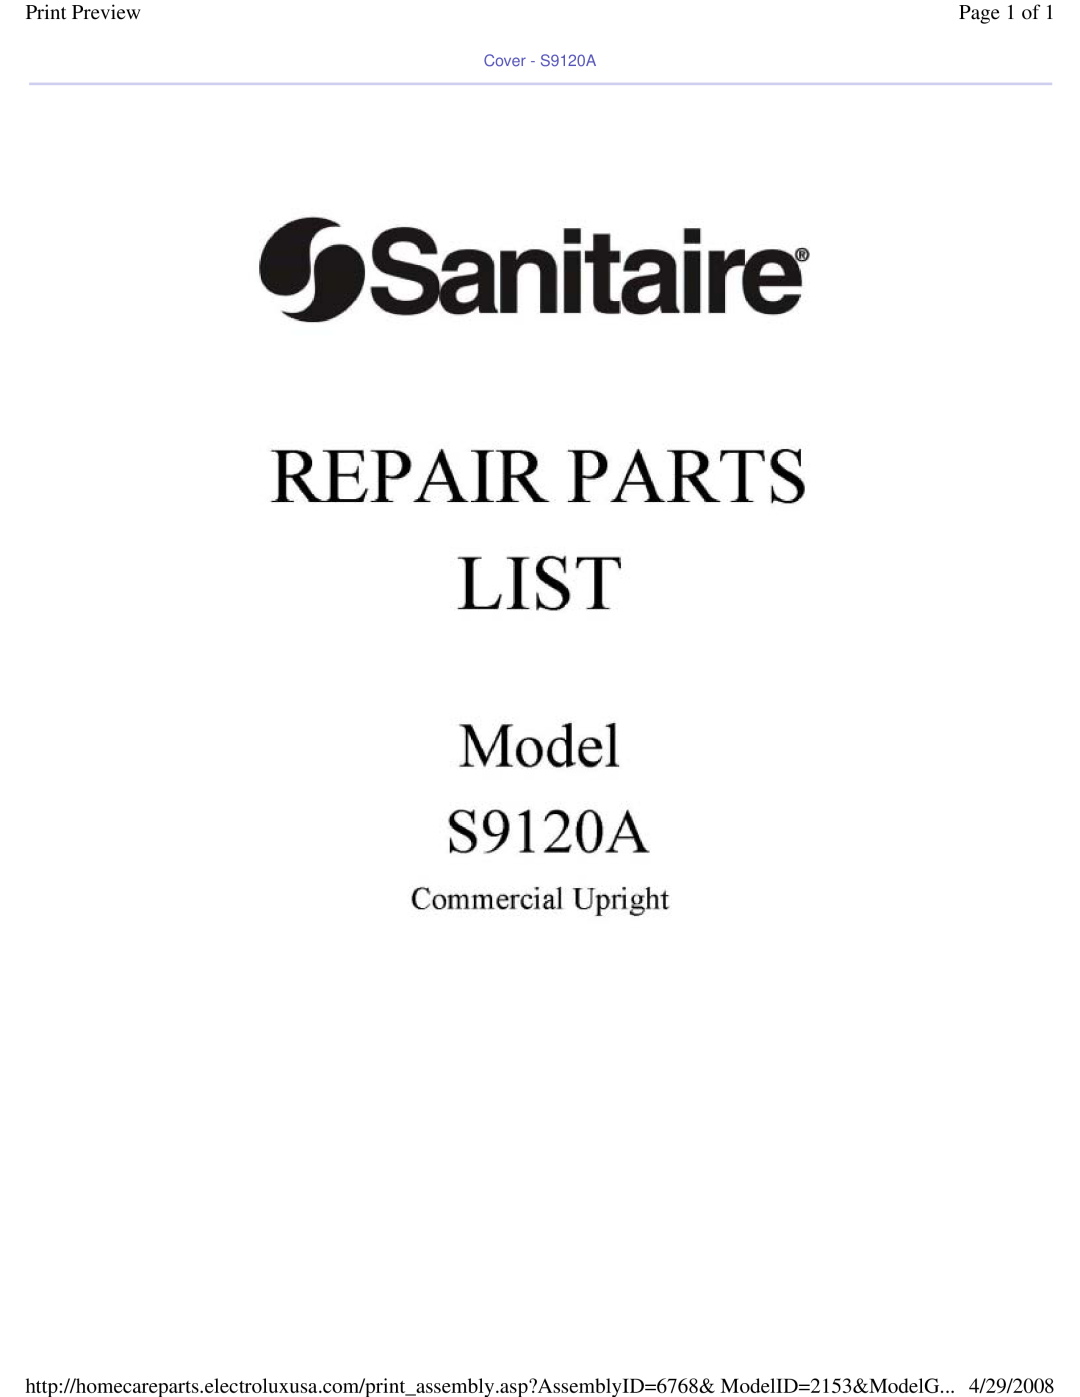 Sanitaire manual Print Preview, Page 1 of, Cover - S9120A 